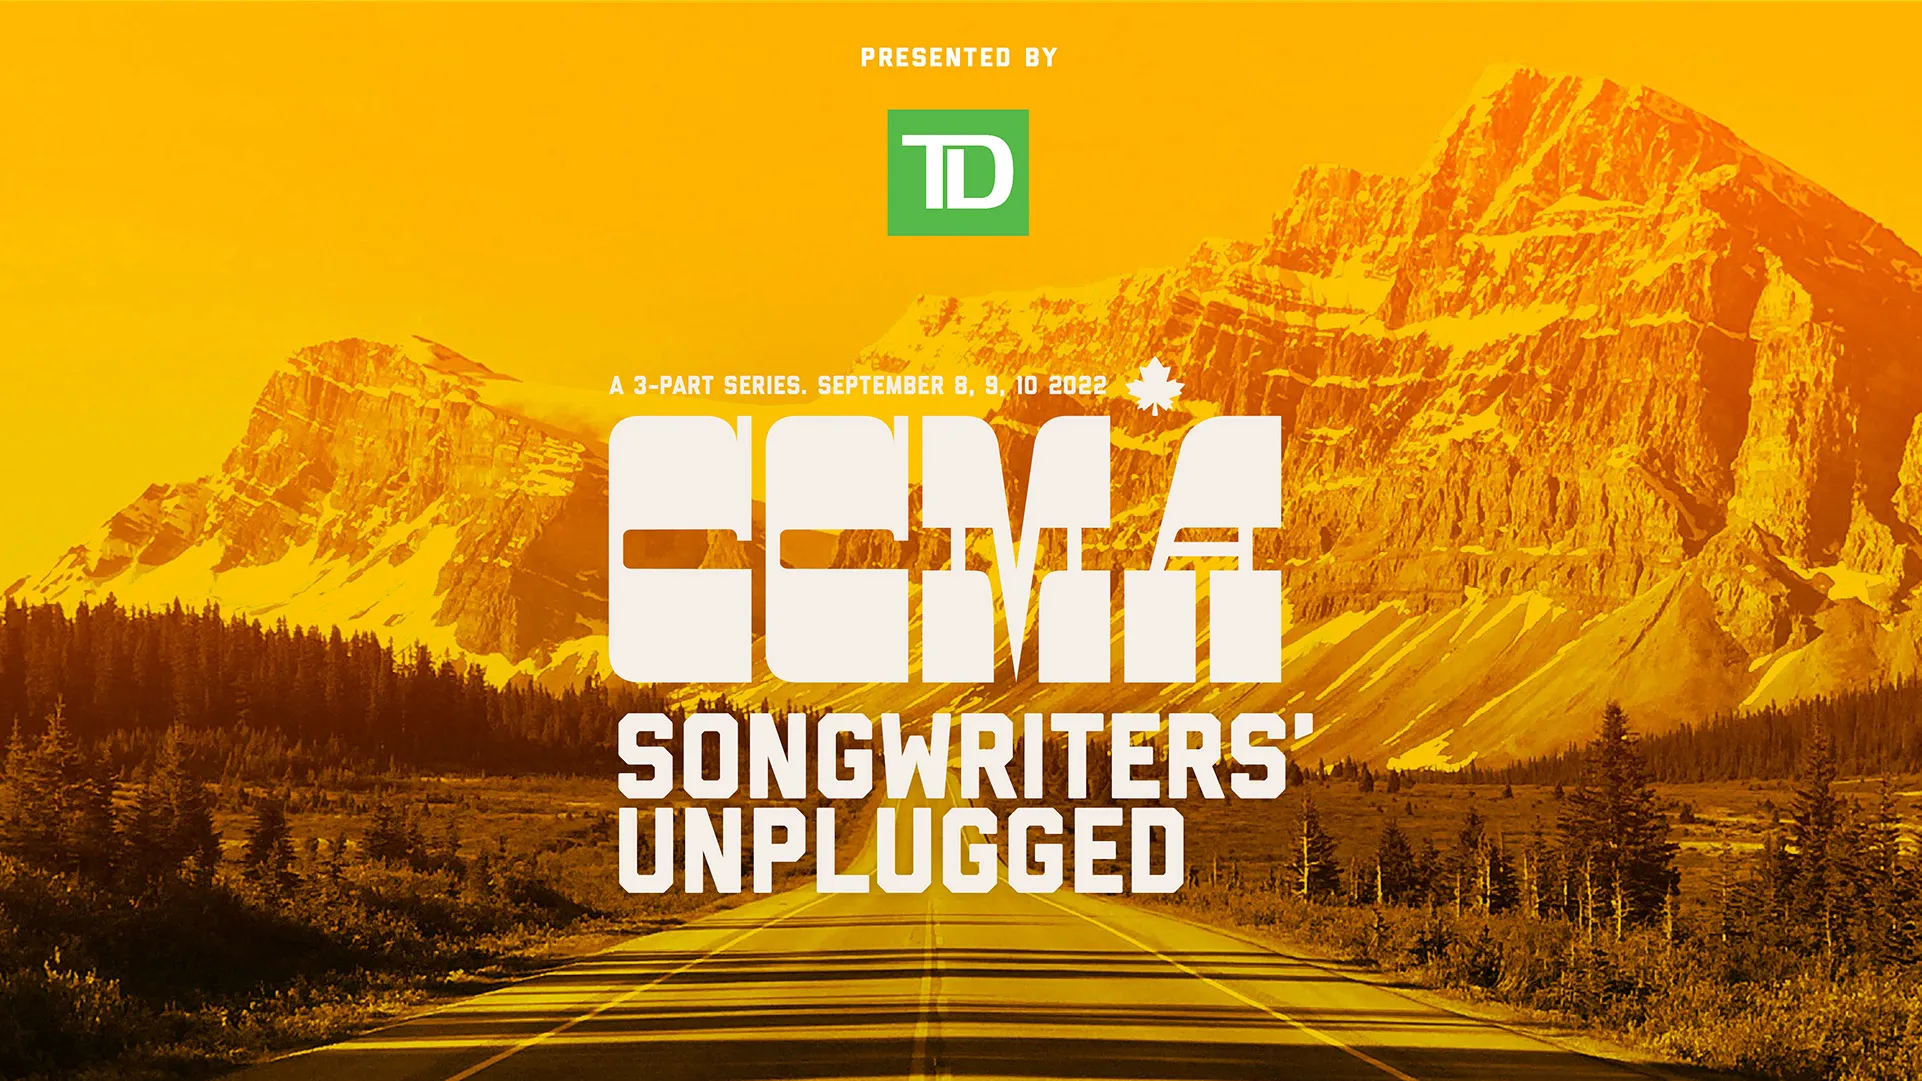 Songwriters Unplugged